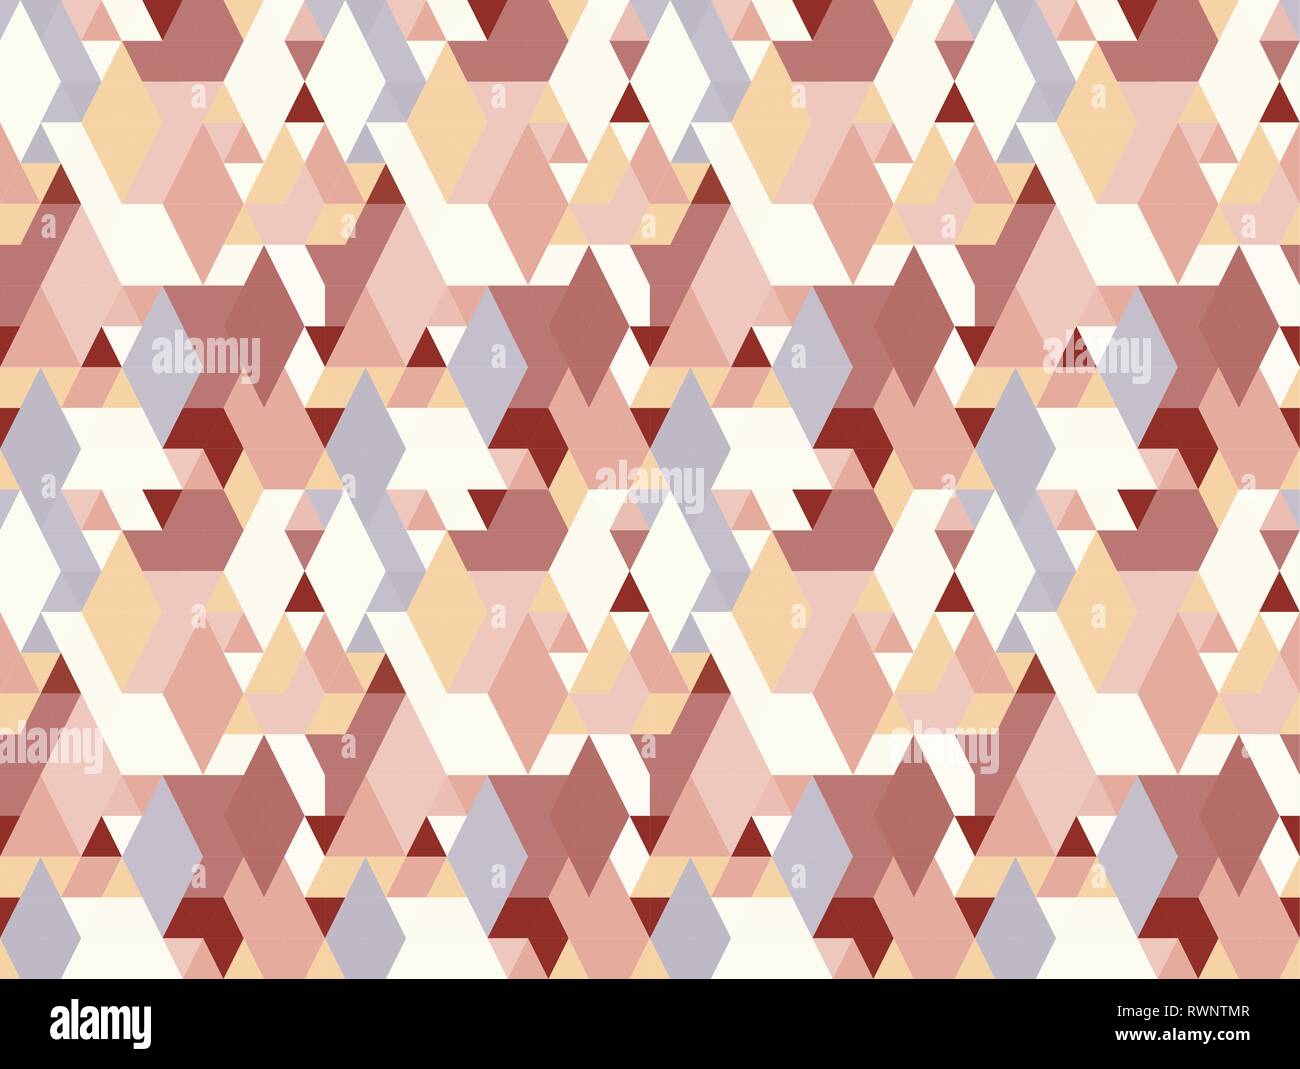 Vector colorful geometric shapes seamless pattern background. Stock Vector